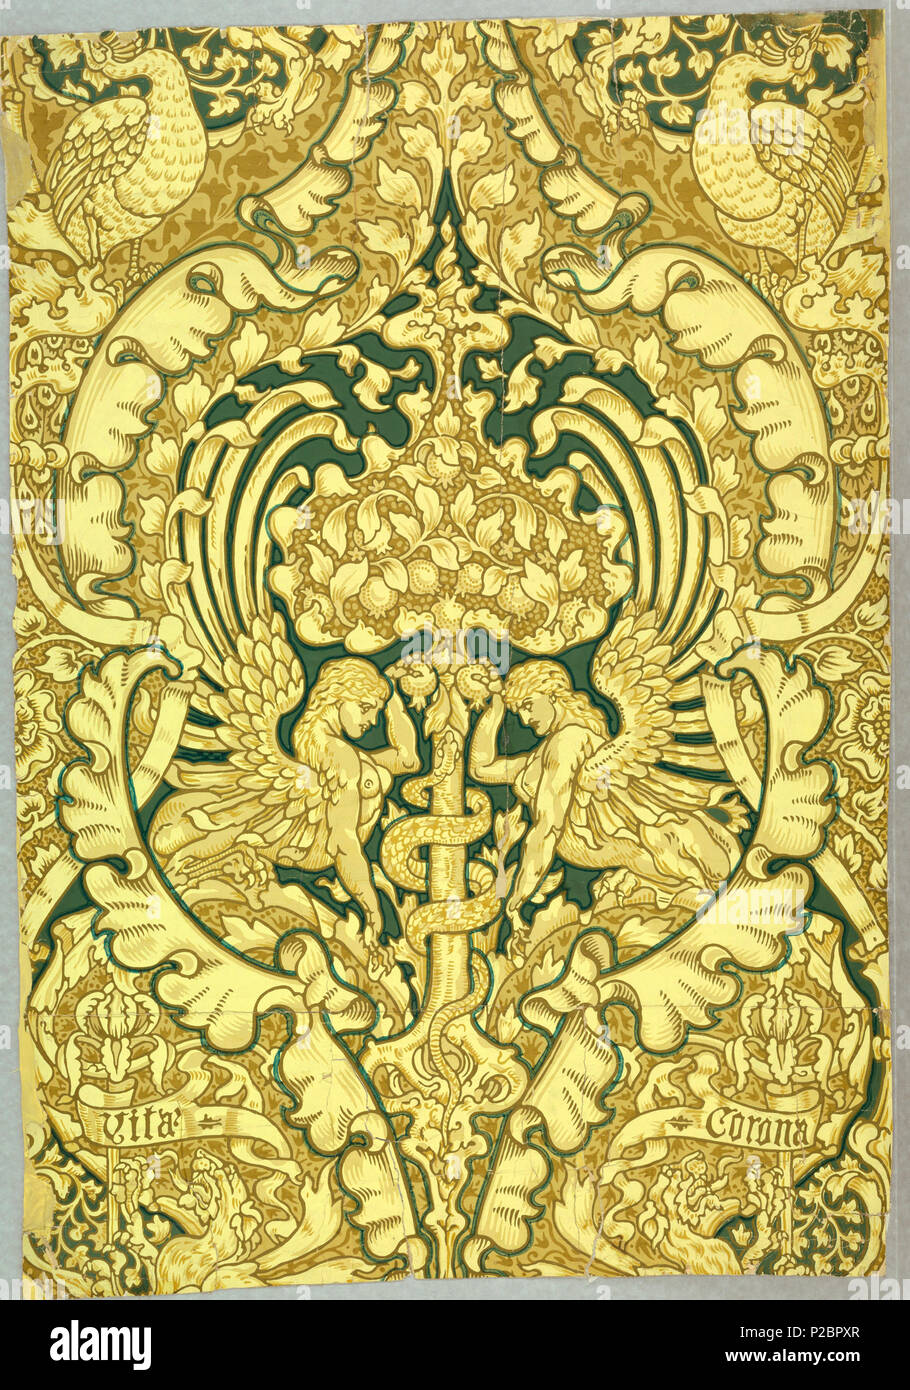 .  English: Sidewall, 'Corona Vita' [Crown of Life], 1890 .  English: Symmetrical design of confronting sphinxes under a tree of life bearing a serpent entwined around its trunk. All this within a cartouche defined by acanthus leaves. Above cartouche, on either side, two peacocks. Below cartouche, two banners: the left one reads 'Vita', right banner reads: 'Corona'; printed in pale yellow, beige, light and dark olive, and greens. . 1890 292 Sidewall, &quot;Corona Vita&quot; (Crown of Life), 1890 (CH 18615685-2) Stock Photo